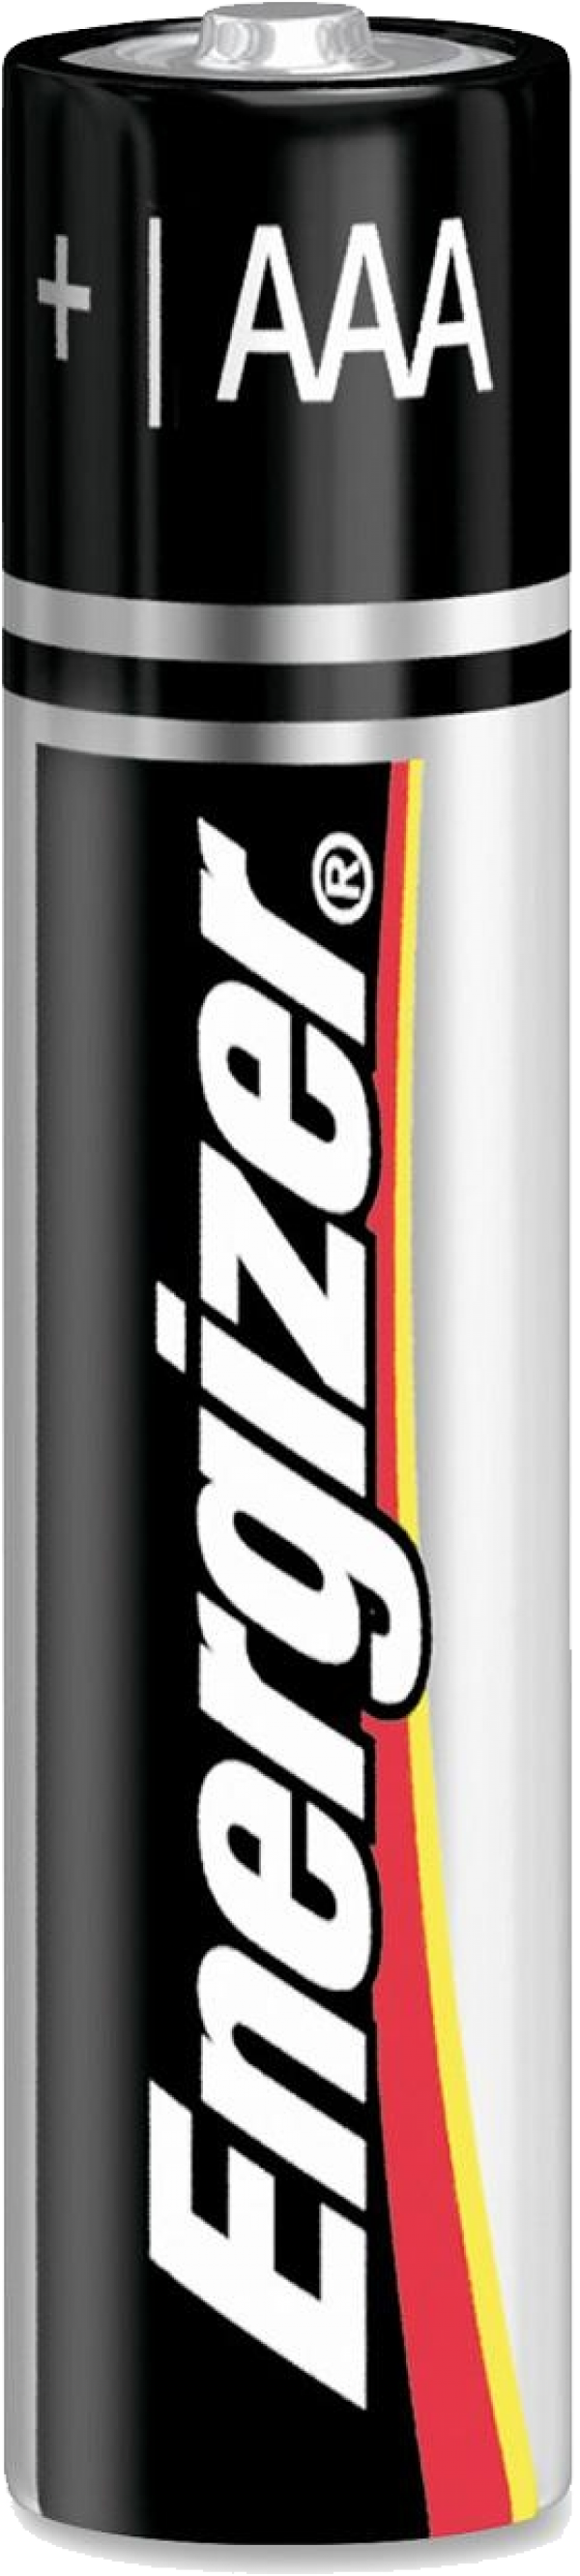 energizer AAA battery free png download